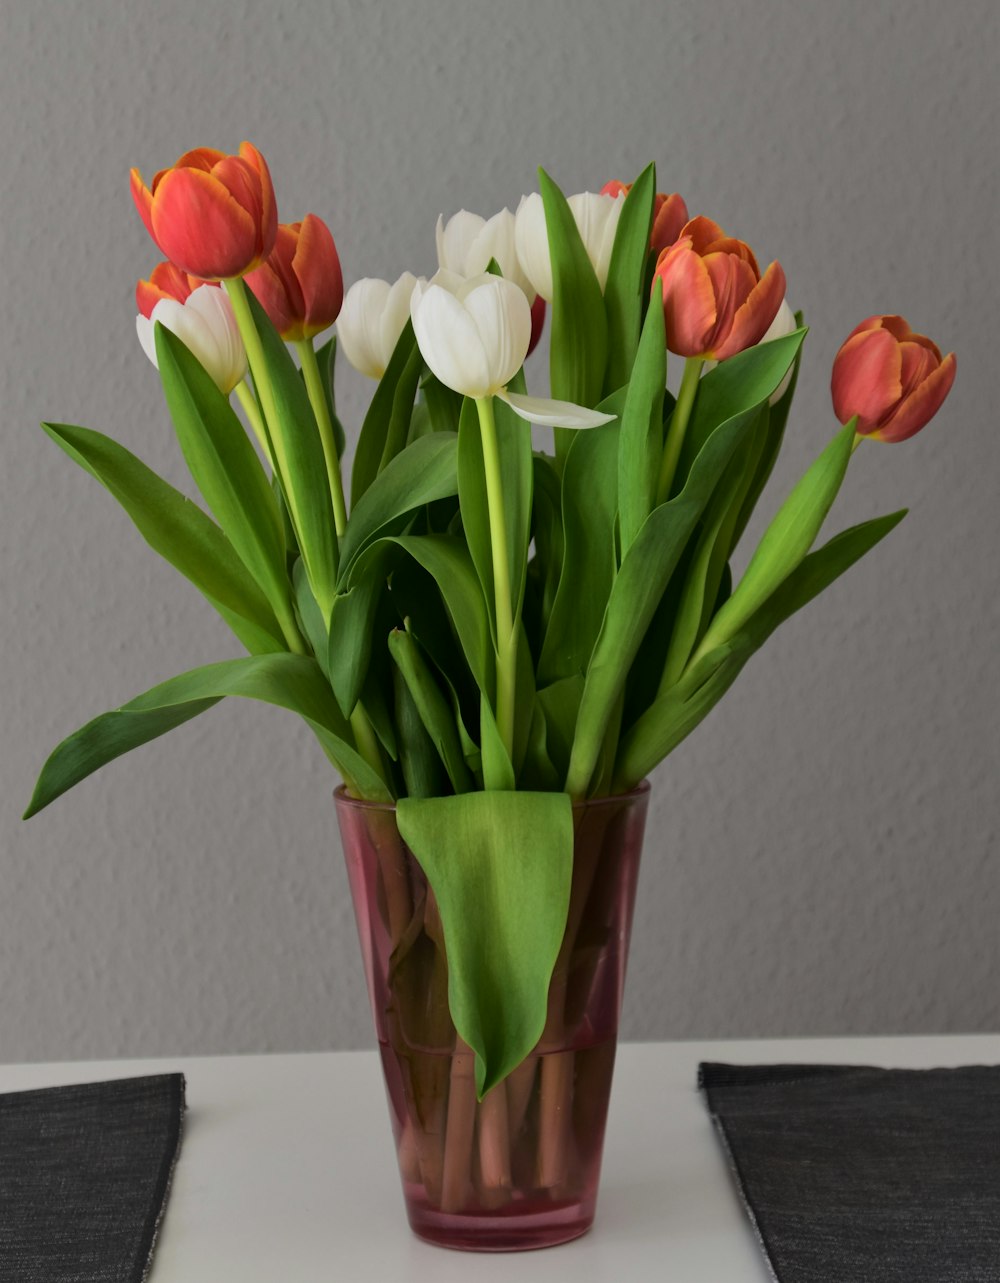 red and white tulips in green glass vase